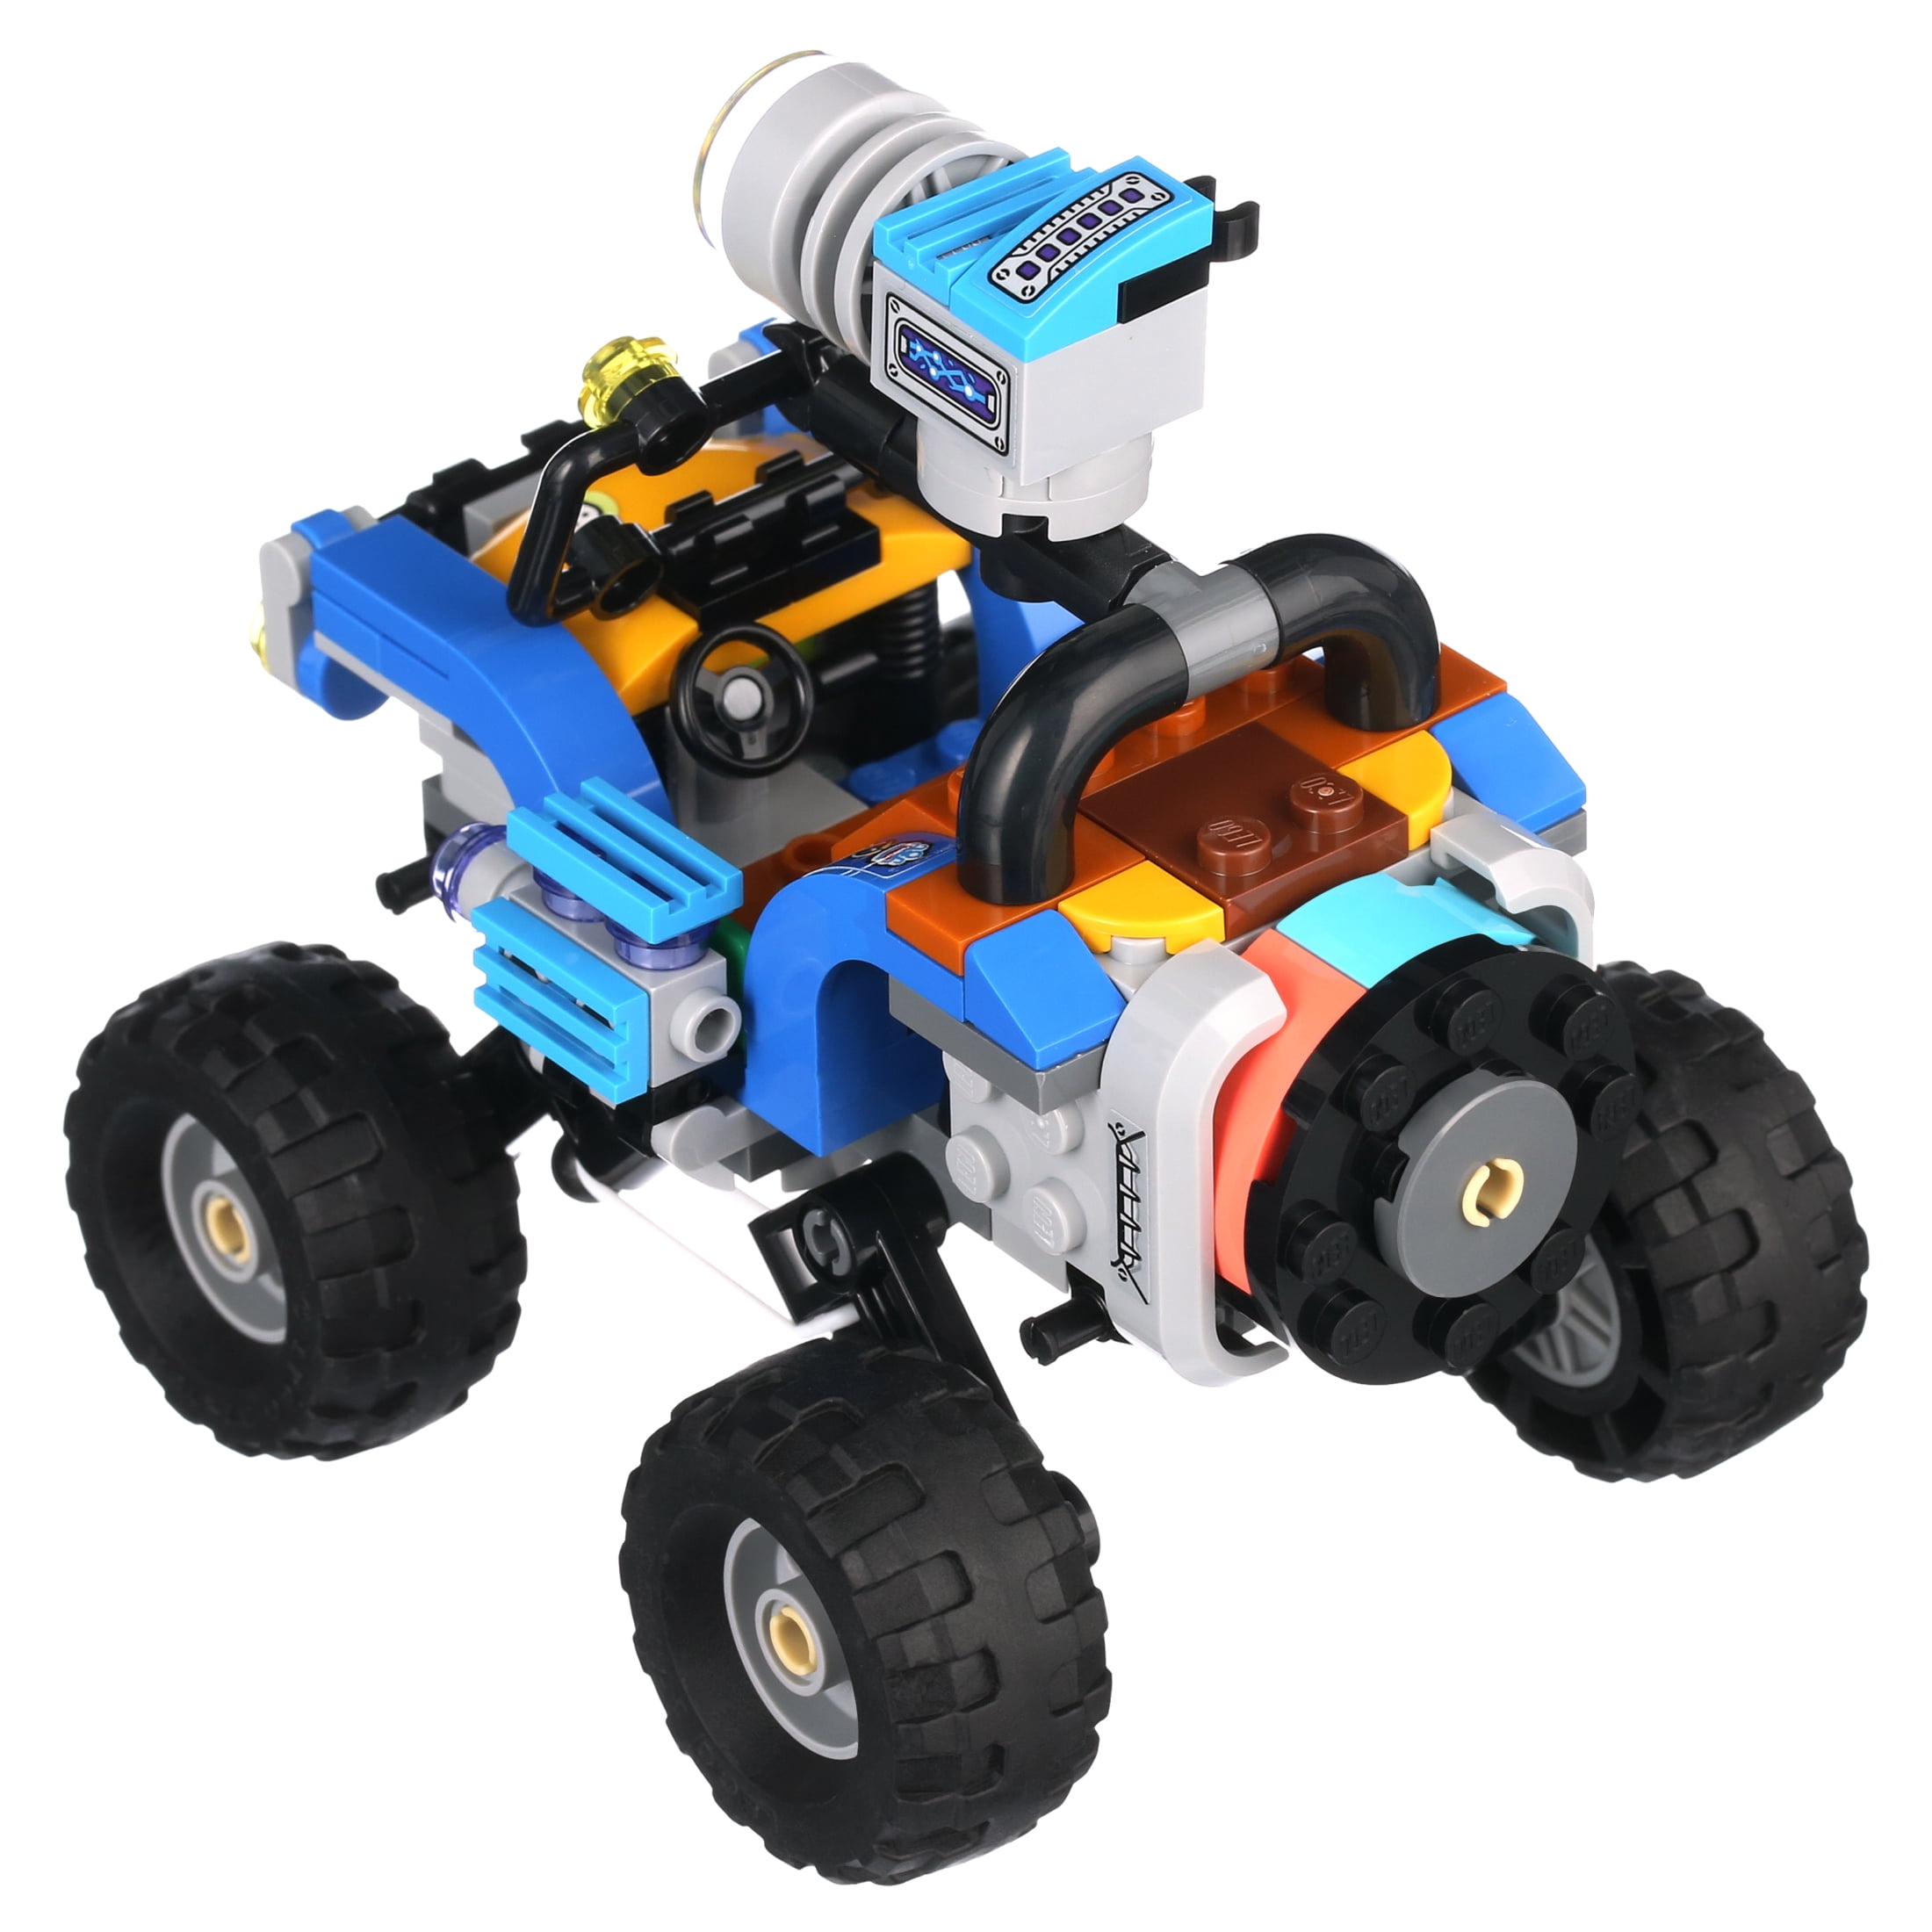 Poesi Mesterskab meteor LEGO Hidden Side Jack's Beach Buggy 70428 Augmented Reality (AR) Play  Experience for Kids (170 Pieces) - Walmart.com